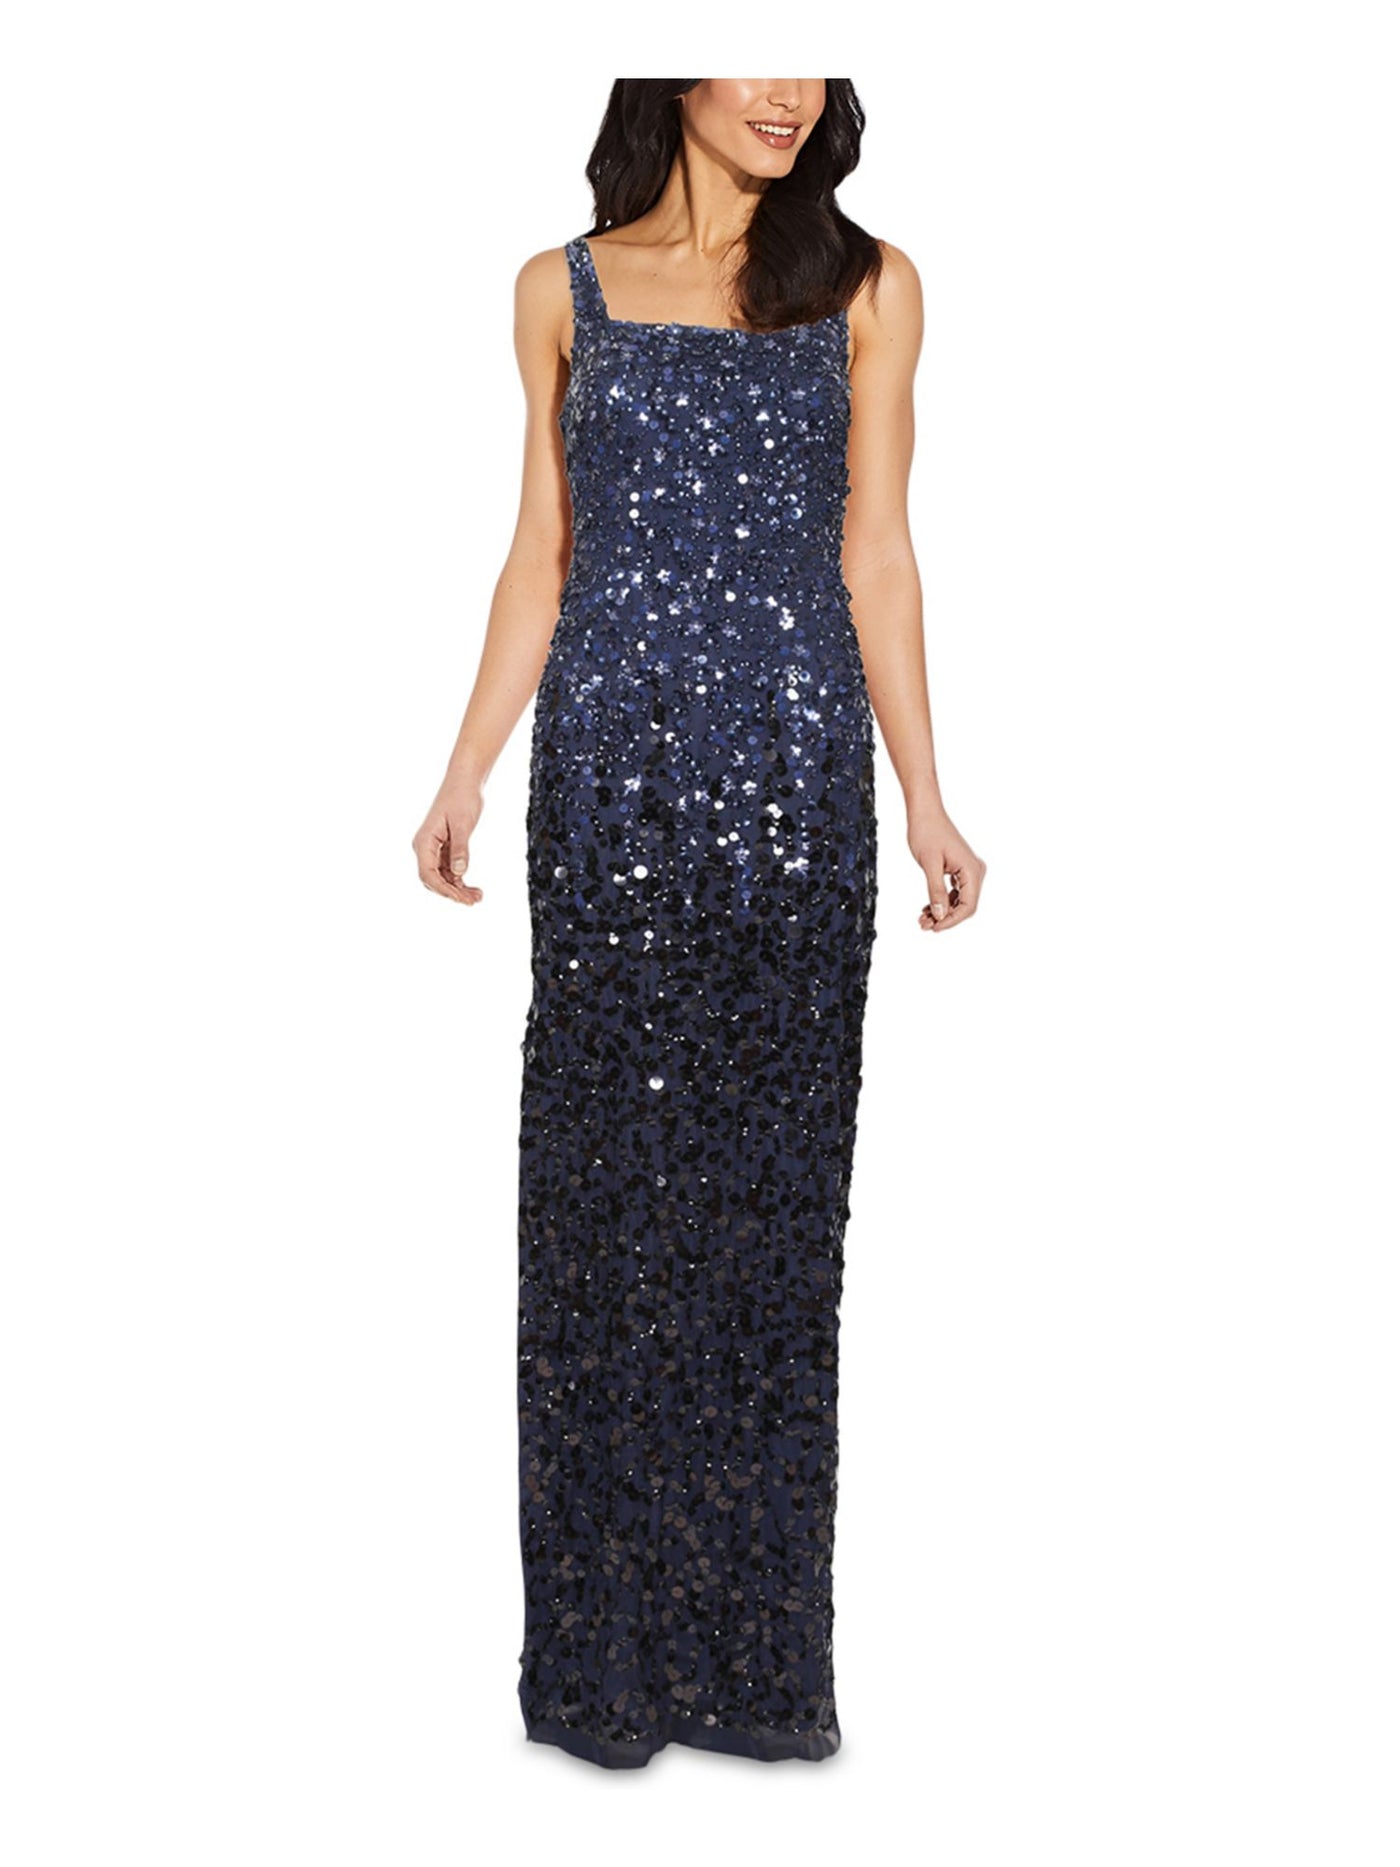 ADRIANNA PAPELL Womens Navy Stretch Sequined Zippered Slitted Lined Sleeveless Square Neck Full-Length Formal Gown Dress 0